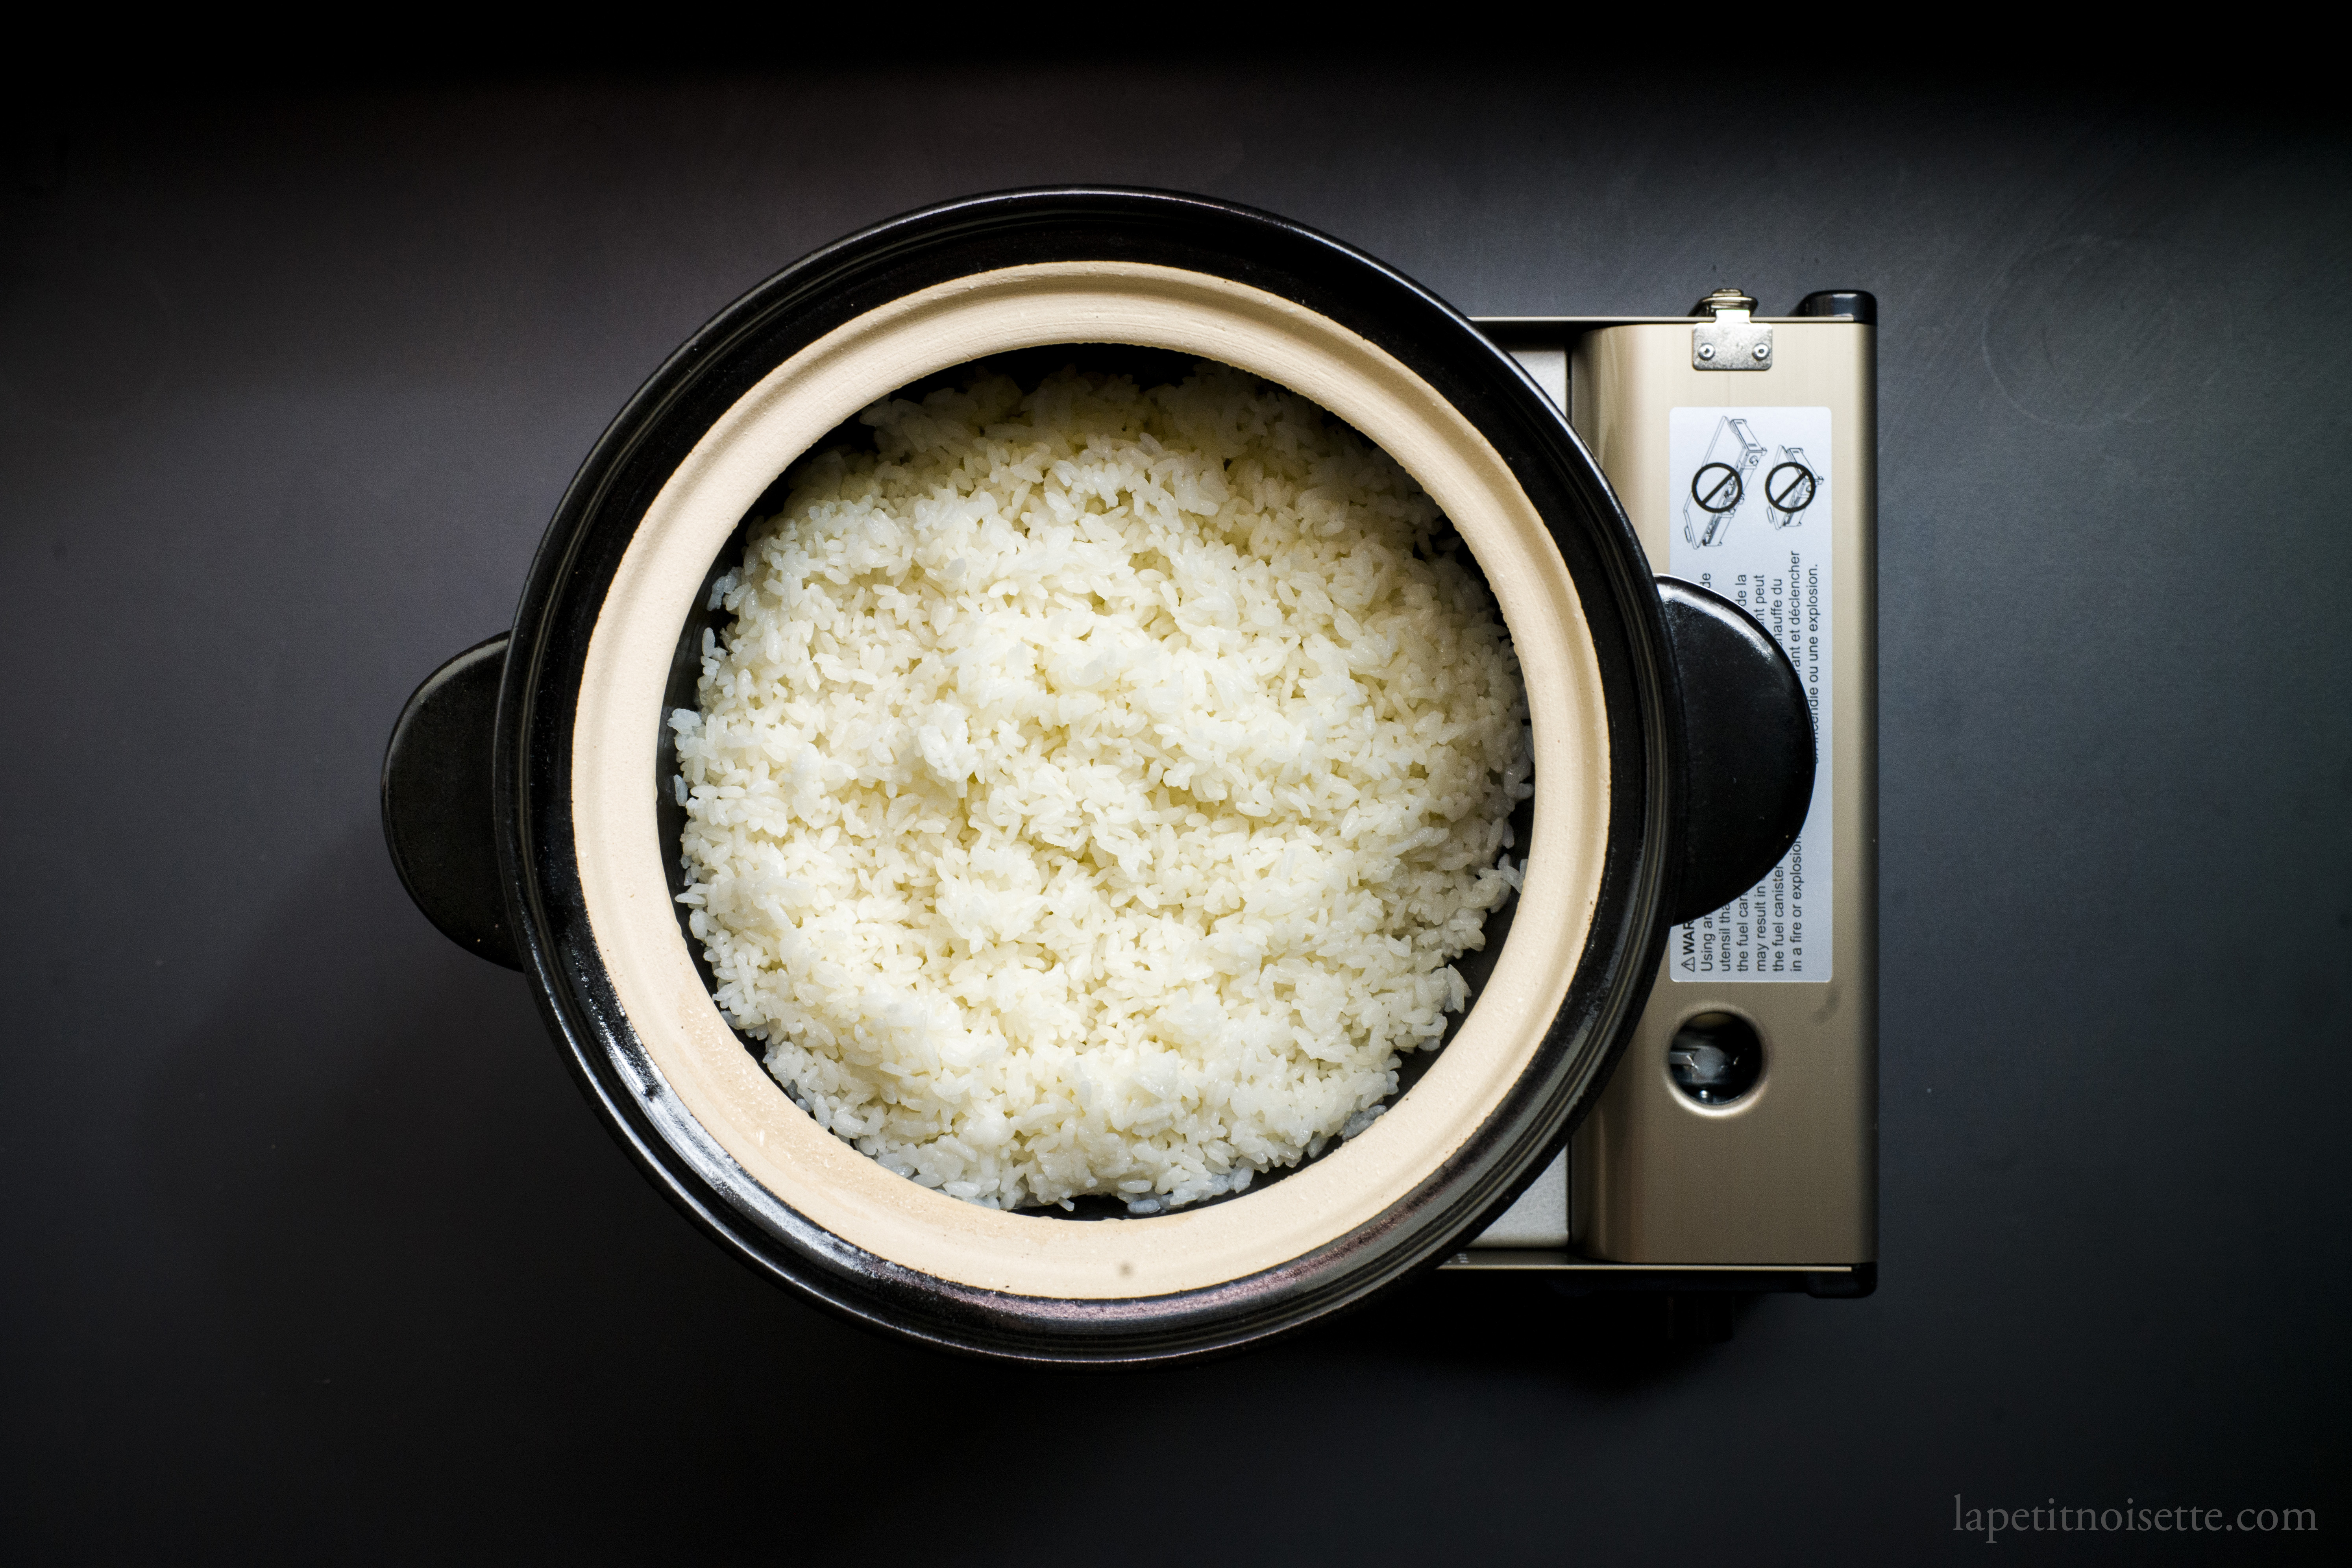 Freshly cooked rice in a traditional double lid clay pot rice cooker.